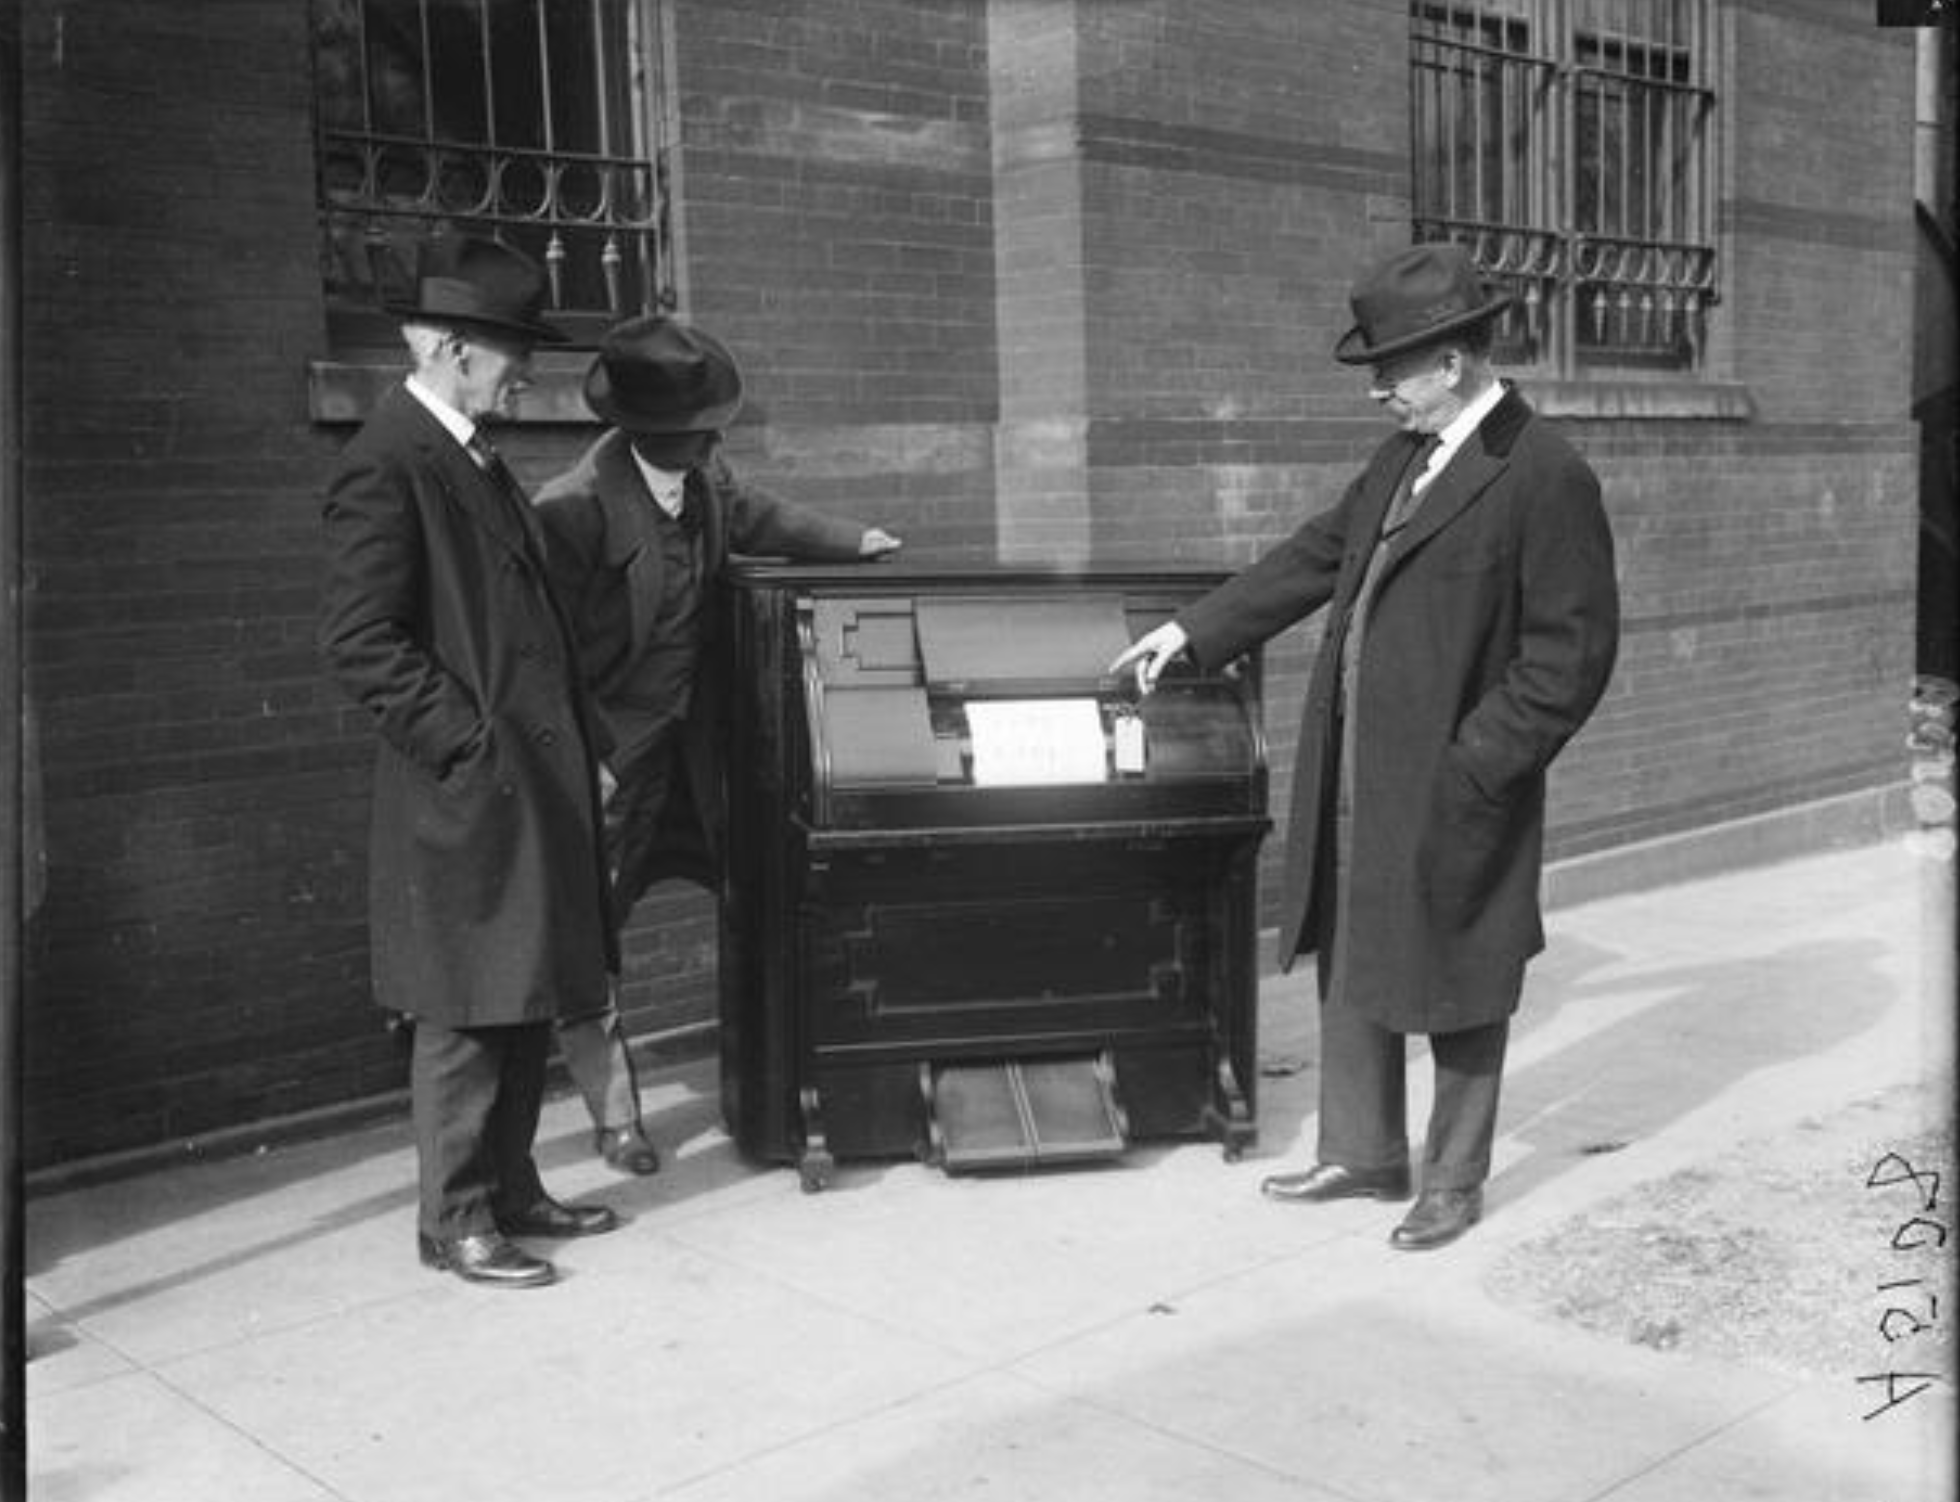 Original Pianola self playing piano system being presented to Smithsonian Museum as gift by Edwin S. Votey the inventor (right, pointing) on December 7, 1922.